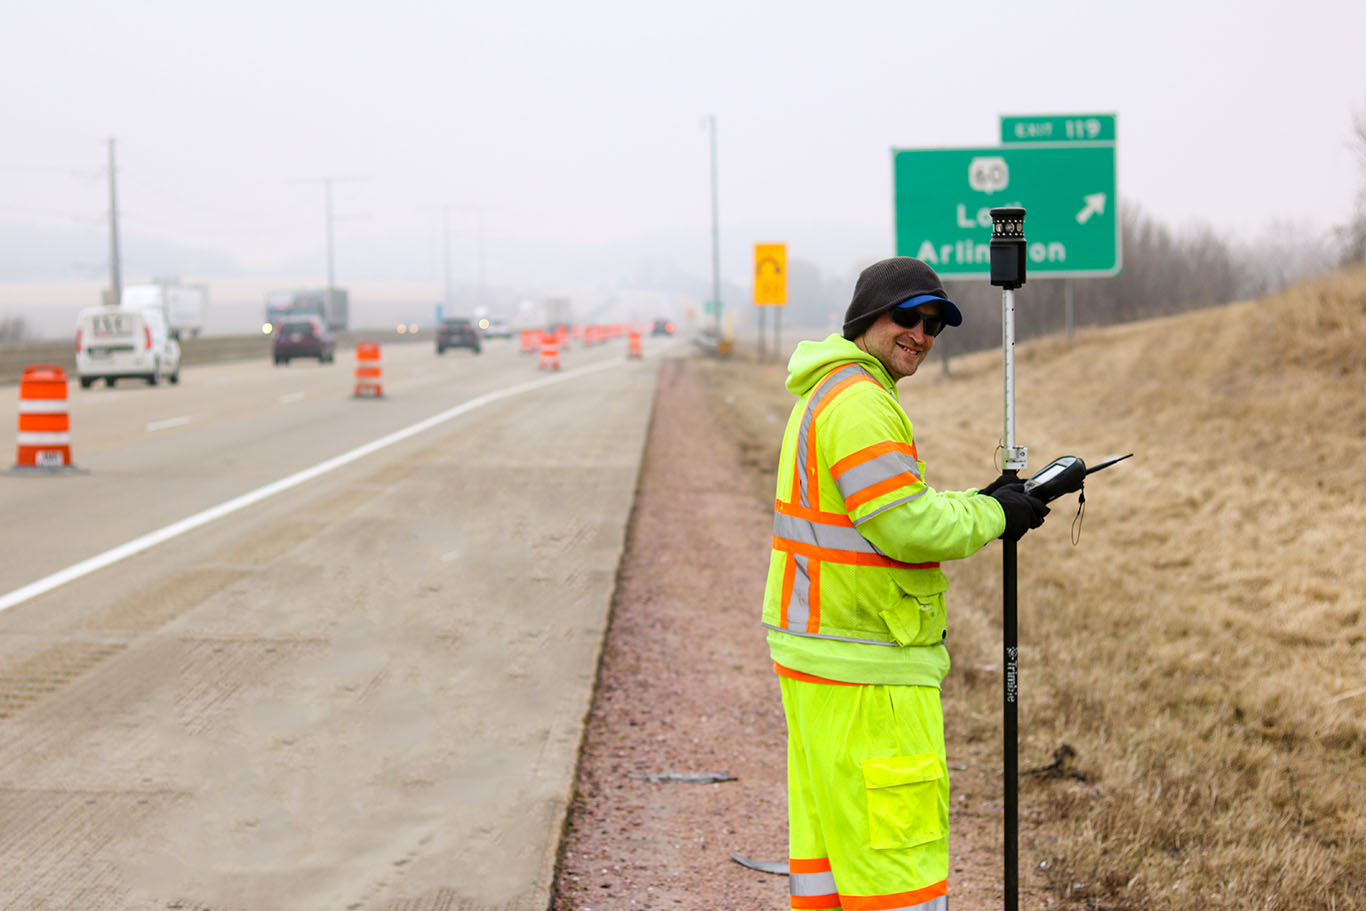 MSA Professional Services performs surveying work as part of a WisDOT interchange project near Lodi, Wisconsin.